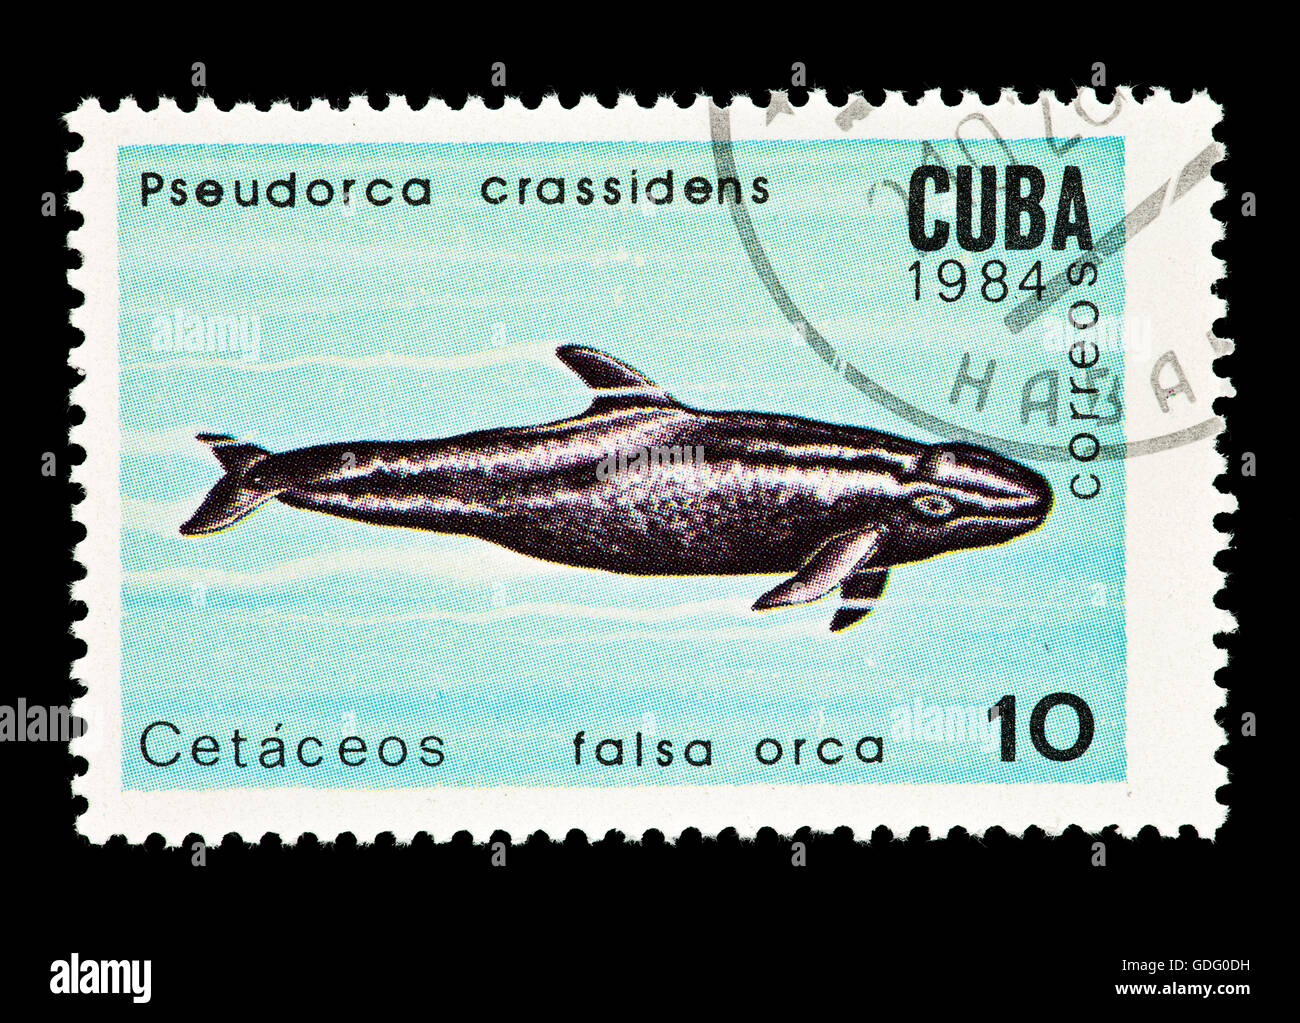 Postage stamp from Cuba depicting a false killer whale (Pseudorca crassidens) Stock Photo